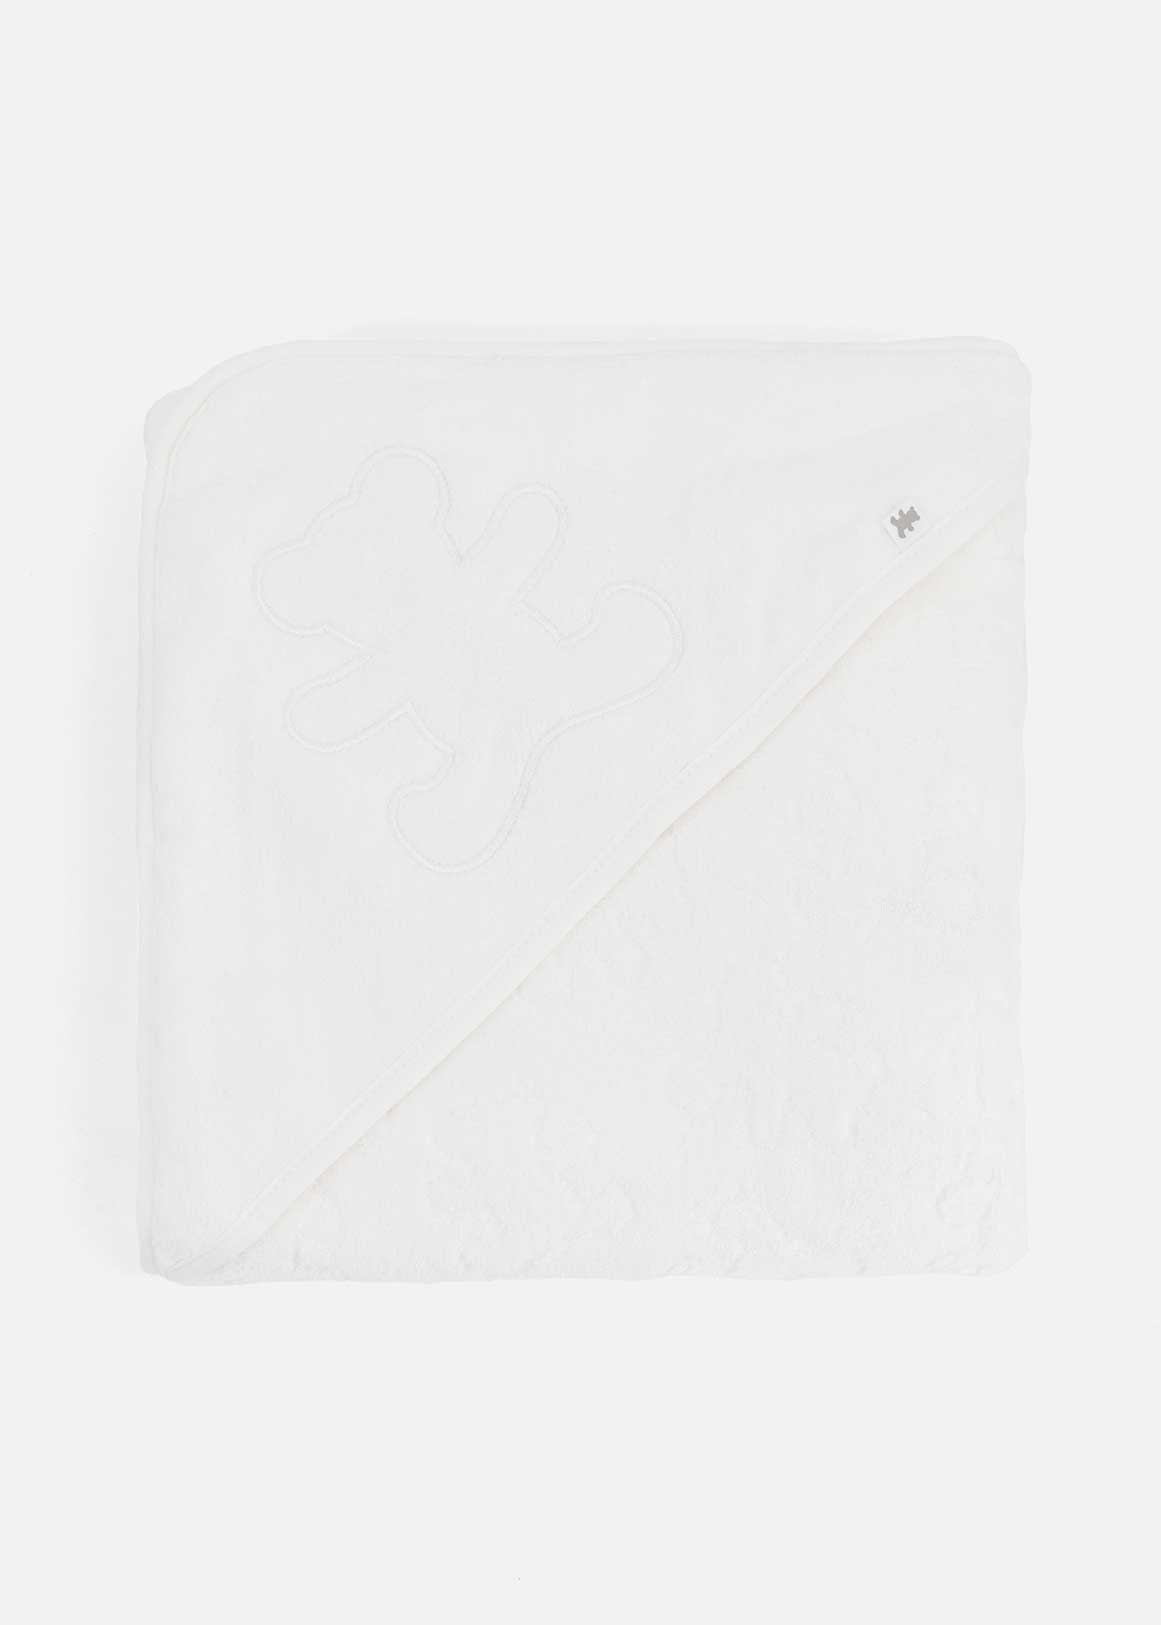 AW23 JACQUARD TOWEL - Woolworths Mauritius Online